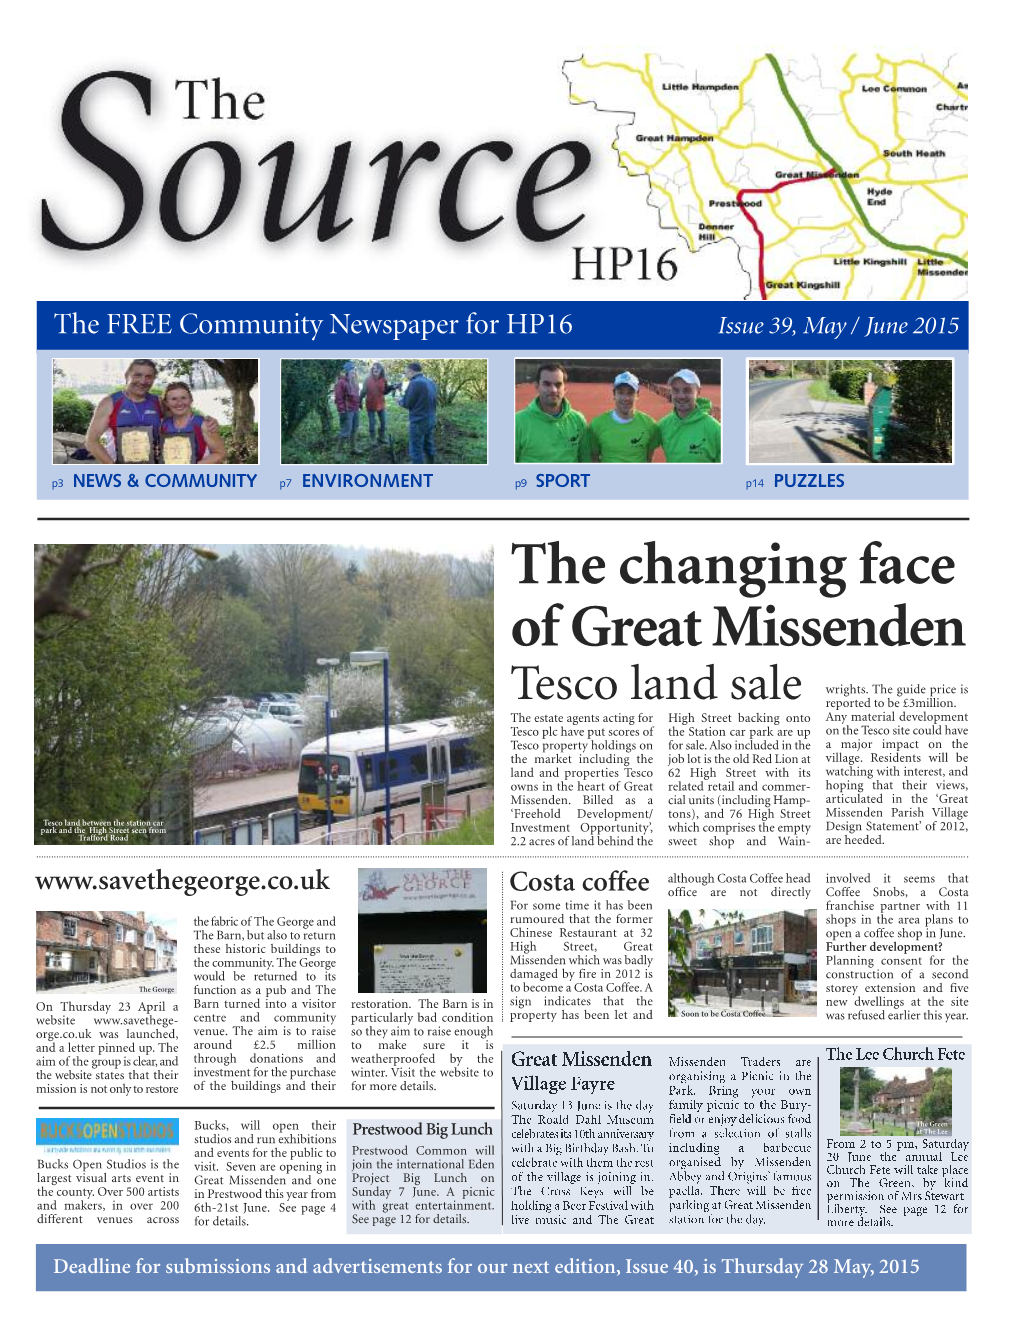 The Changing Face of Great Missenden